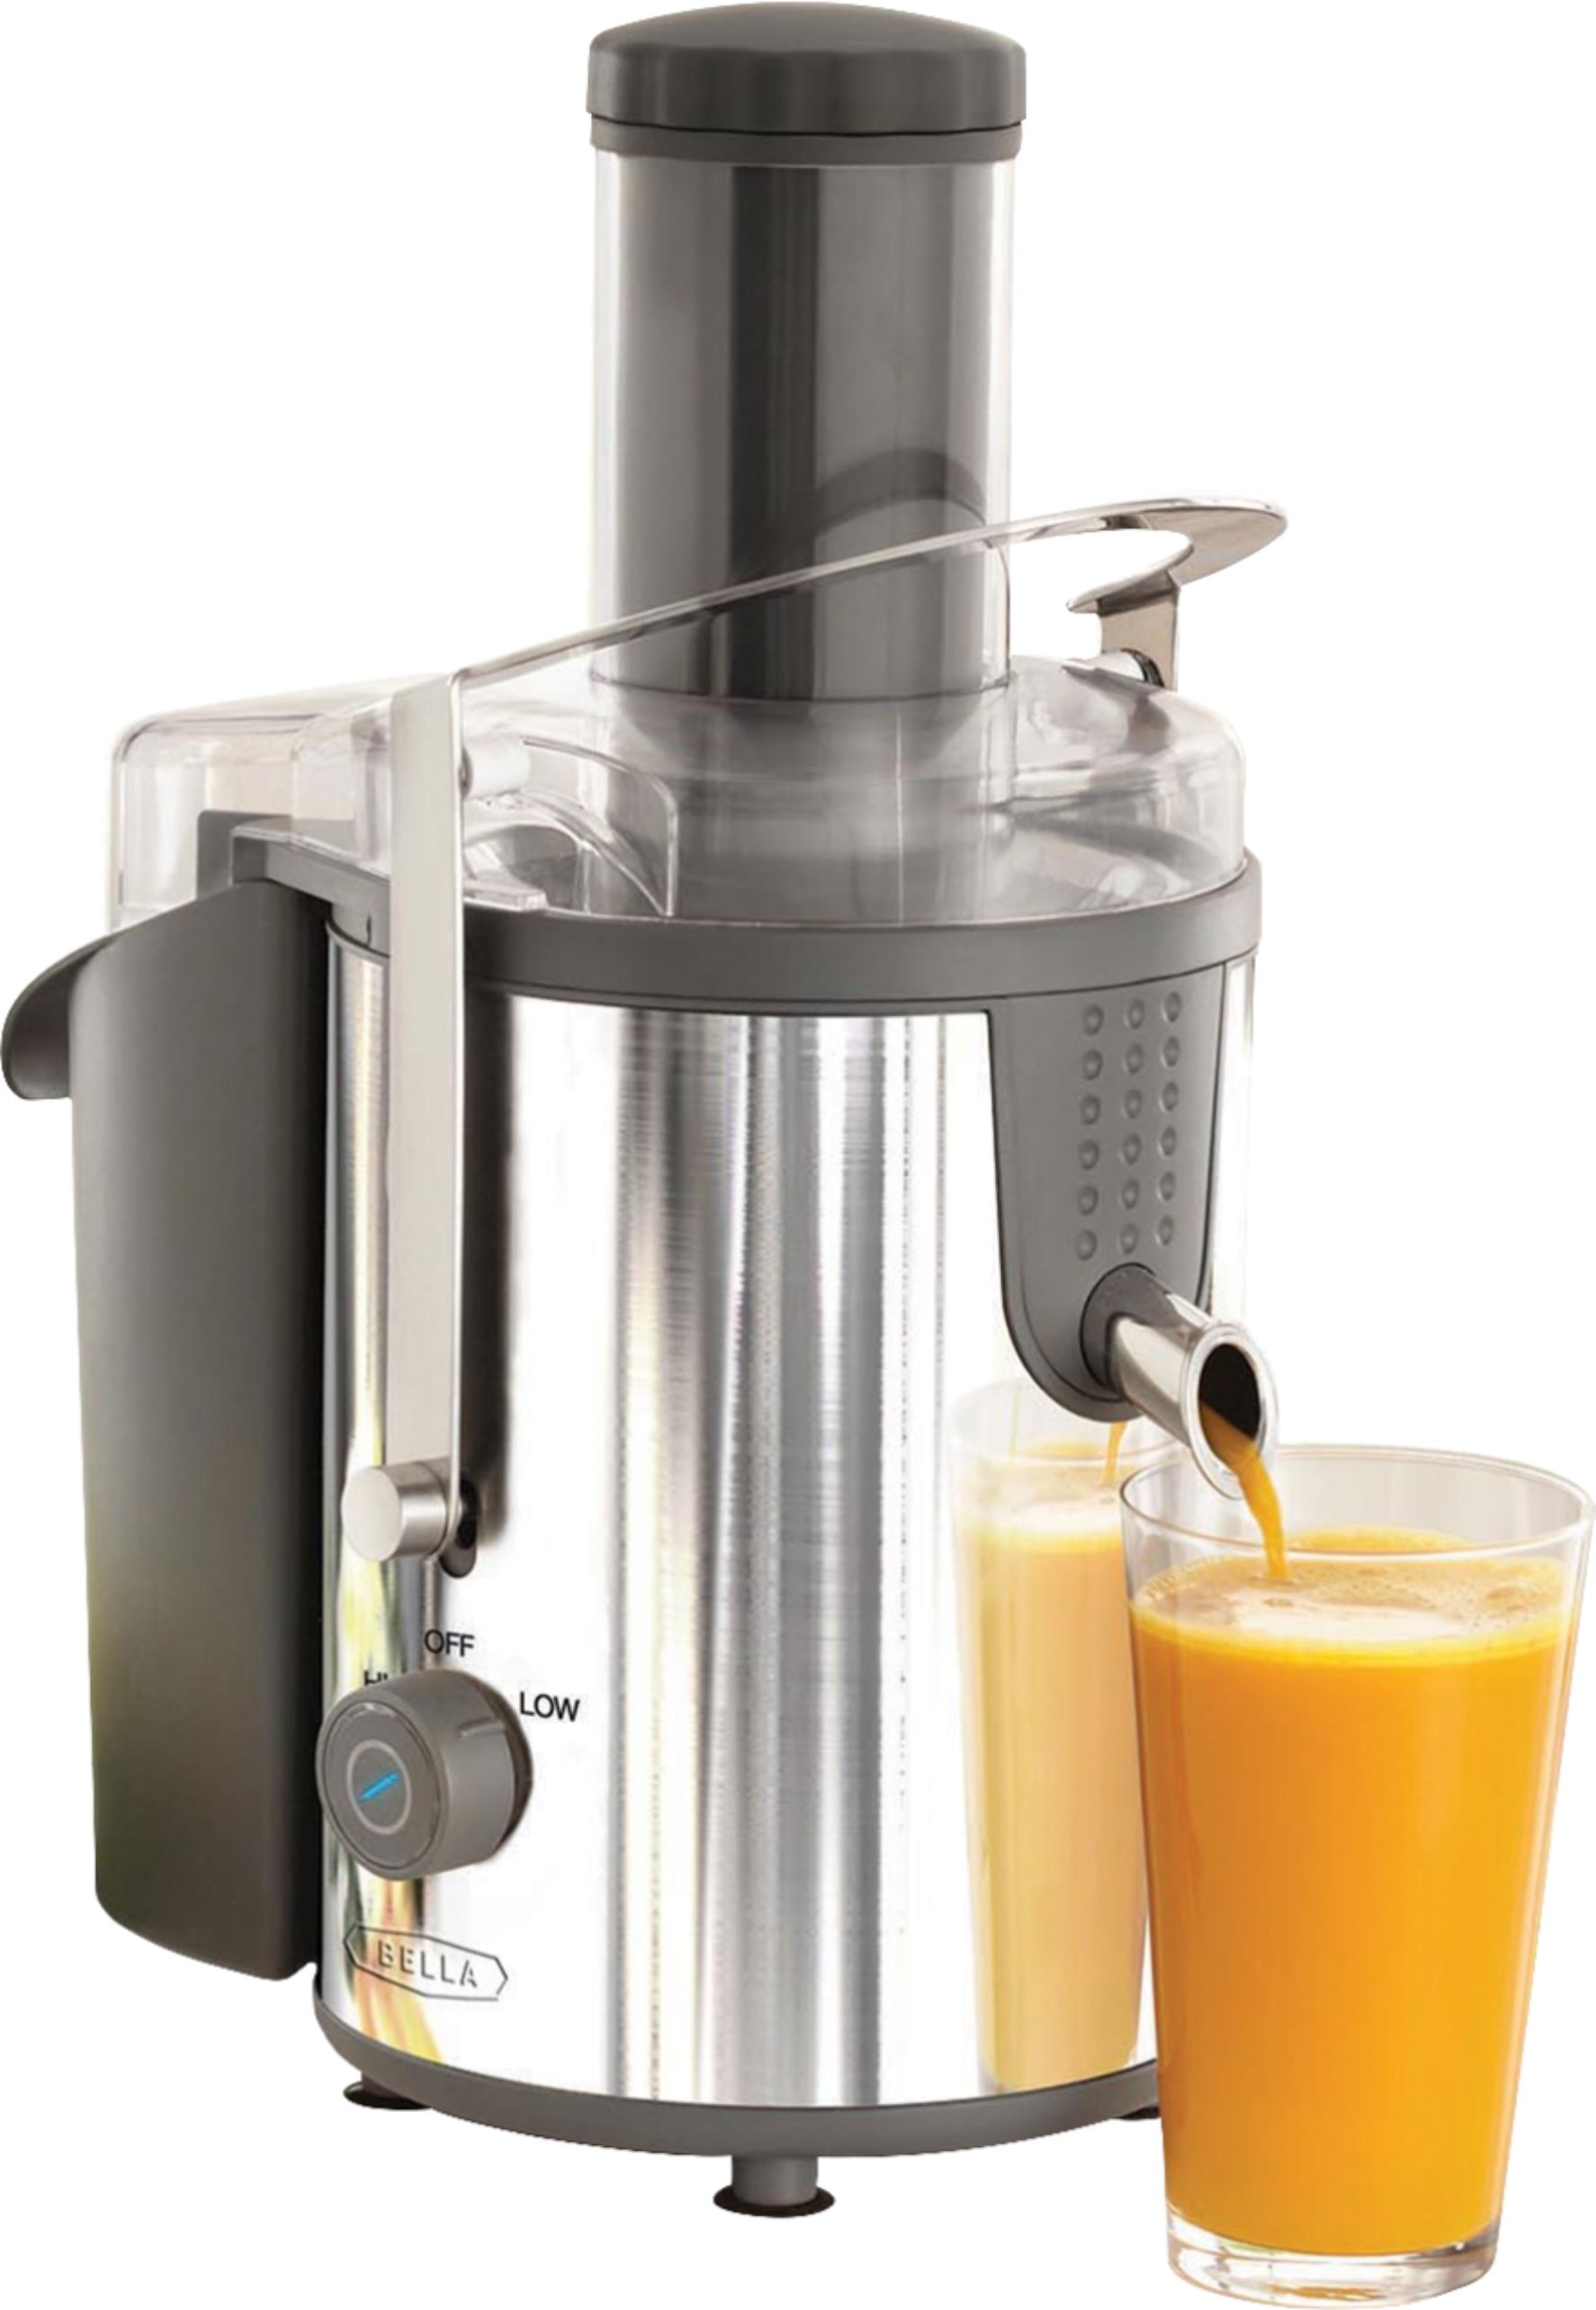 BELLA BLA13694 13694 High Power Juice Extractor, Stainless Steel -  ReviewNebula.com - Make your own juices with the BELLA Hi…